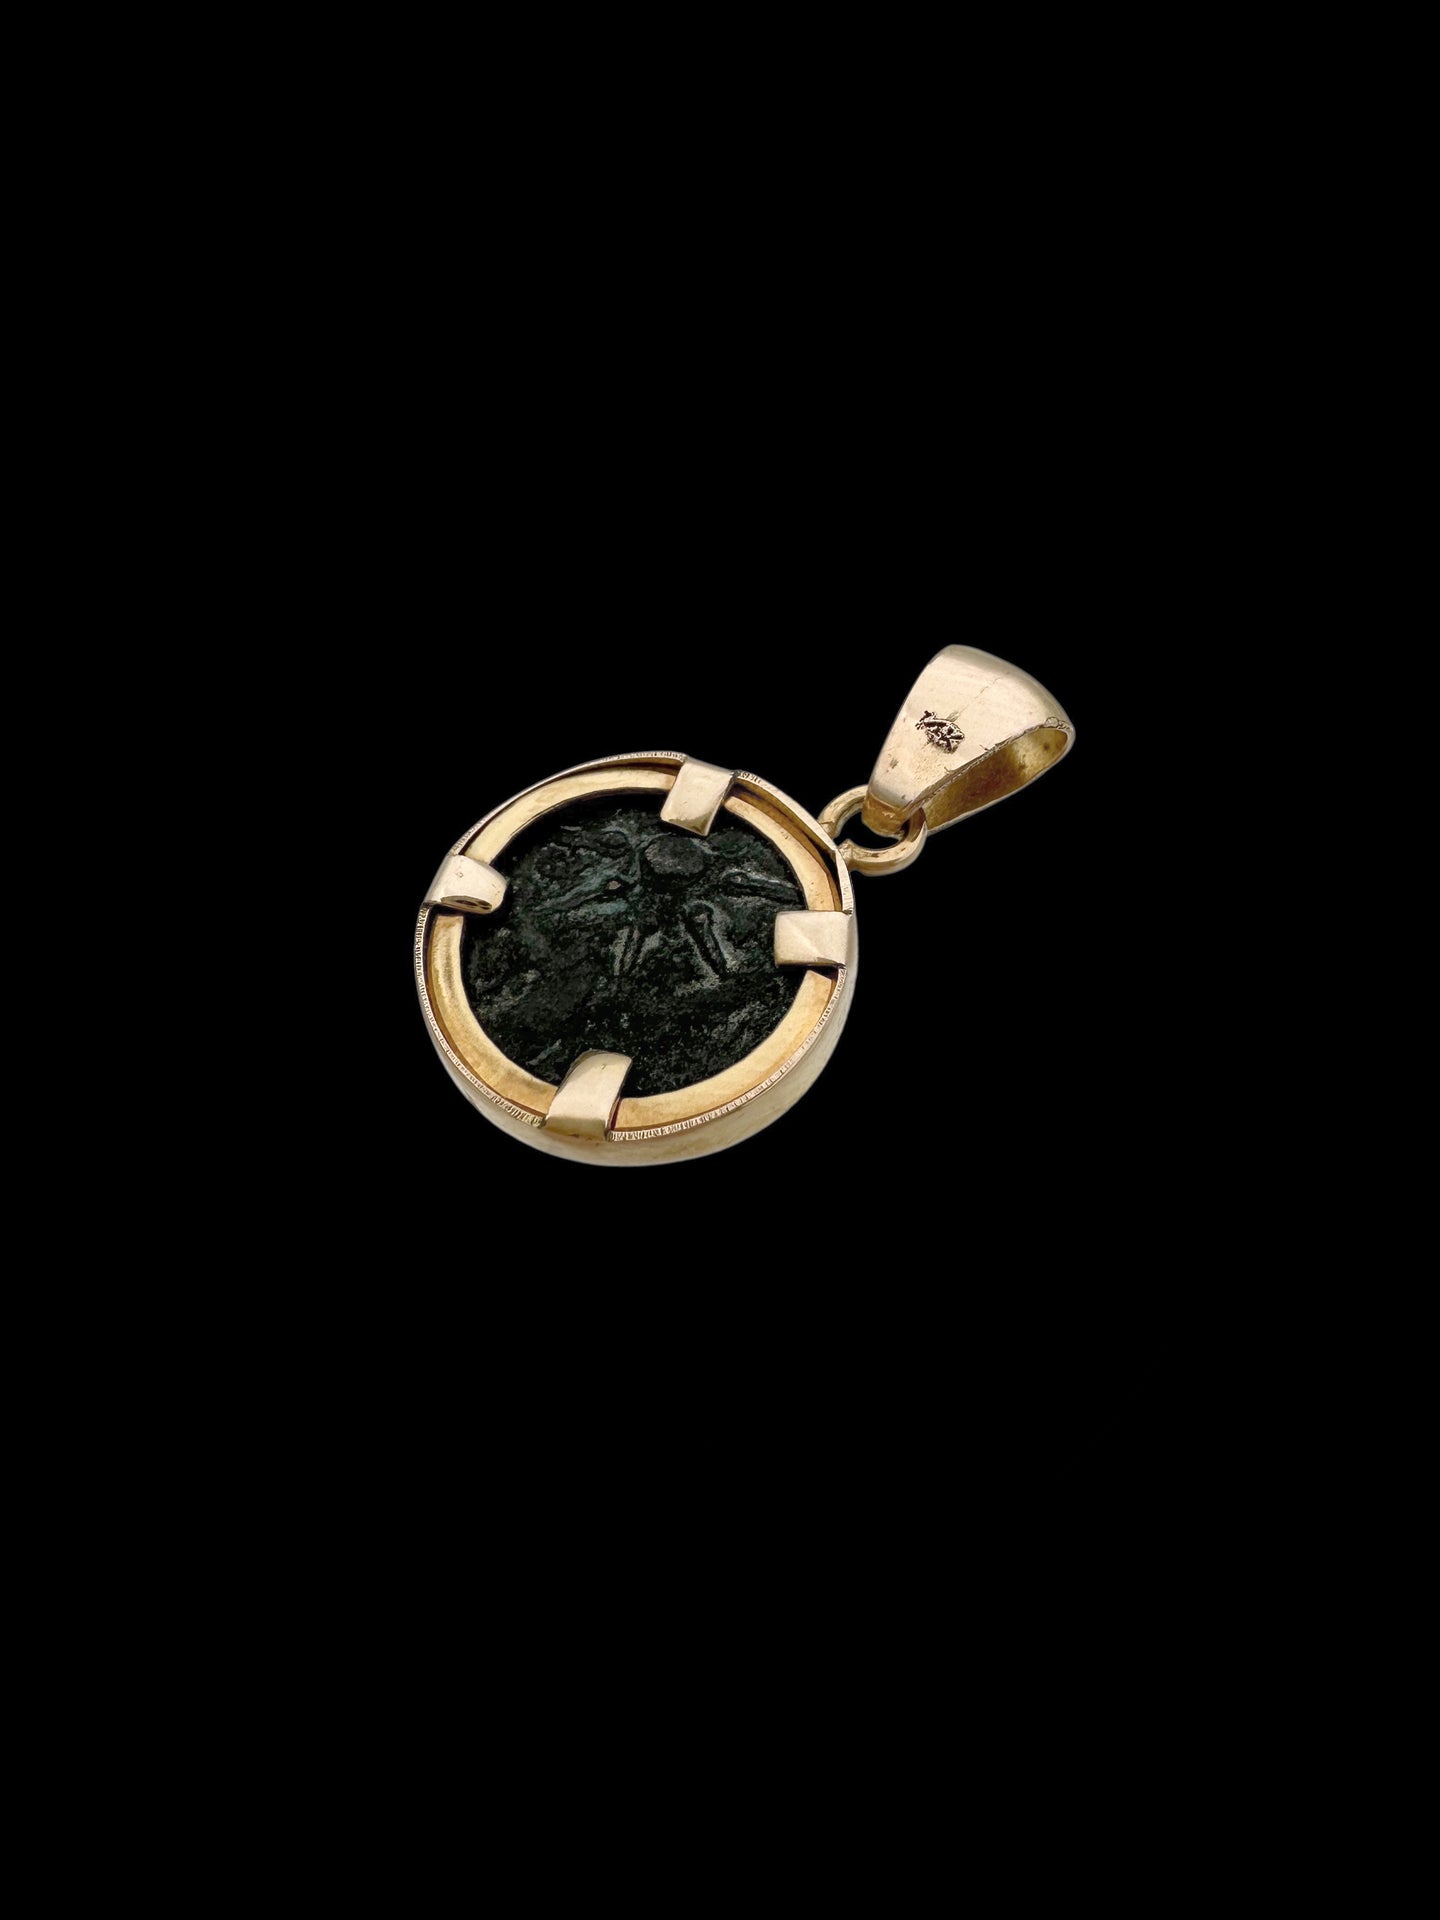 Ancient Widow’s Mite / Jewish Hasmonean Coin Set in Solid 14K Gold Pendant